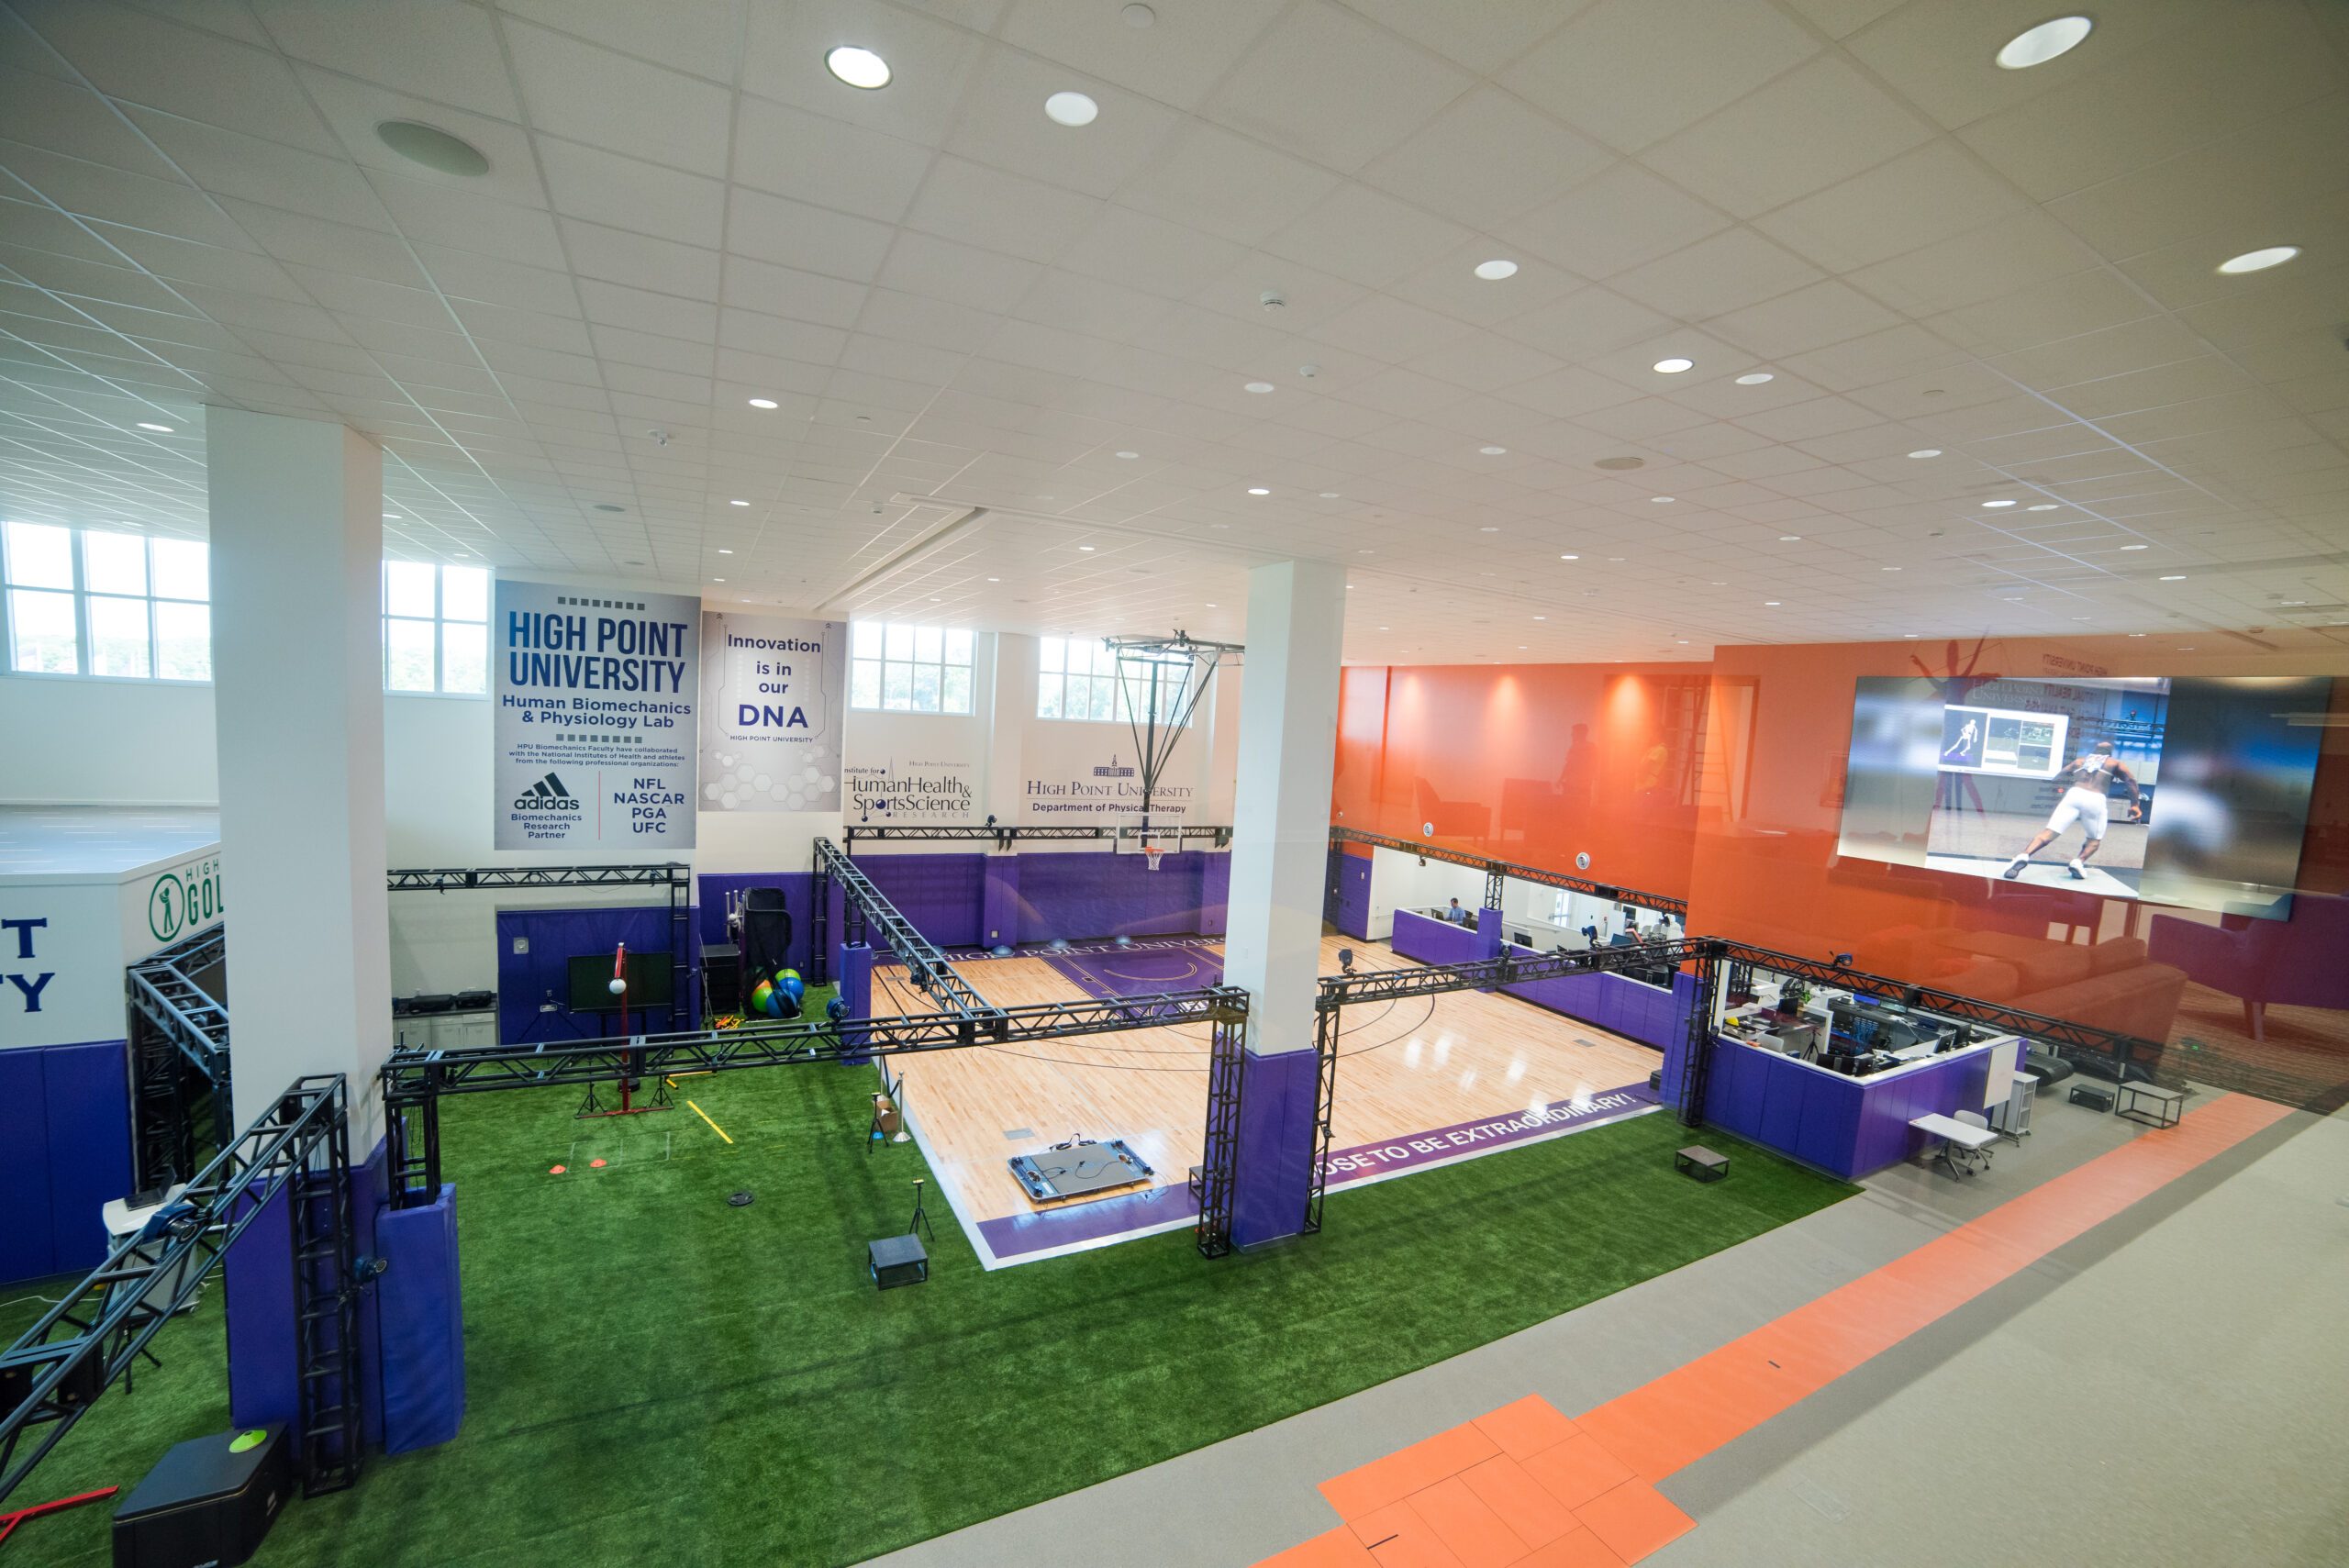 A gym facility with a court and adjoining lab space